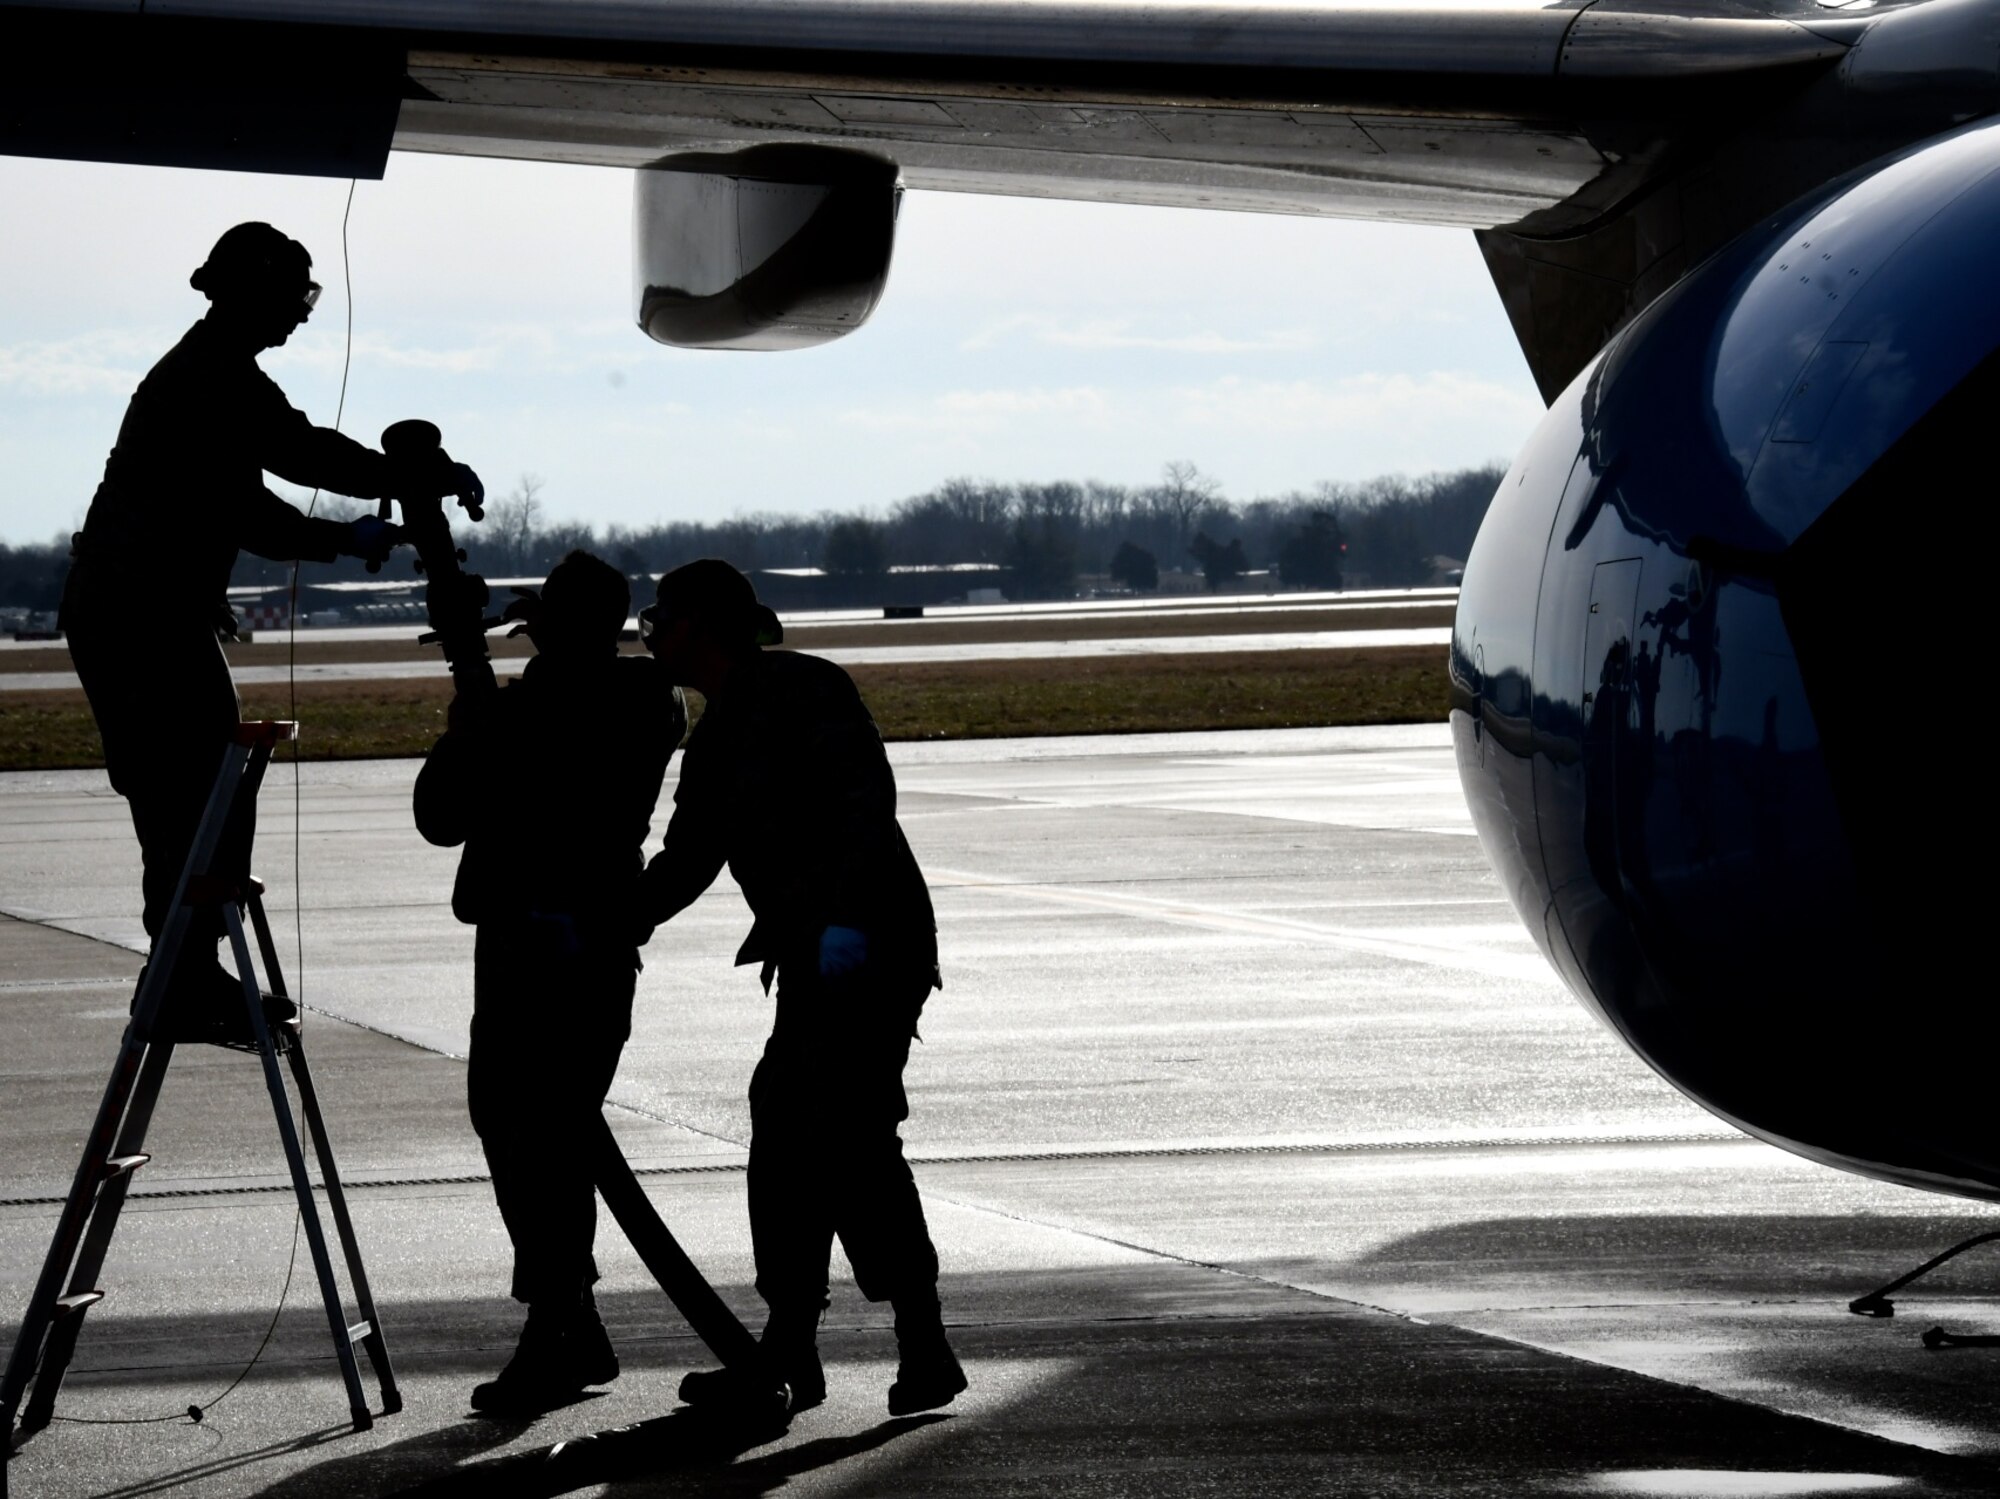 Fuel technicians get ready to add jet petroleum into a waiting C-40C aircraft on March 14, 2019 at Scott Air Force Base, Illinois as they prep it for another flight.  The 932nd Airlift Wing's Maintenance Group (MXG), is responsible for leading people who are always training and equipping to inspect, maintain and repair Air Force Reserve Command C-40C planes at Scott Air Force Base. The 932nd MXG's management of resources improves the wing's professionalism and enables the 932nd Operations Group's C-40C pilots to fly distinguished visitor (DV) airlift around the world, anywhere they are needed by the nation's leaders. The Illinois unit, which is part of 22nd Air Force, under Air Force Reserve Command, flies four of the C-40C planes worldwide. (U.S. Air Force photo by Lt. Col. Stan Paregien)